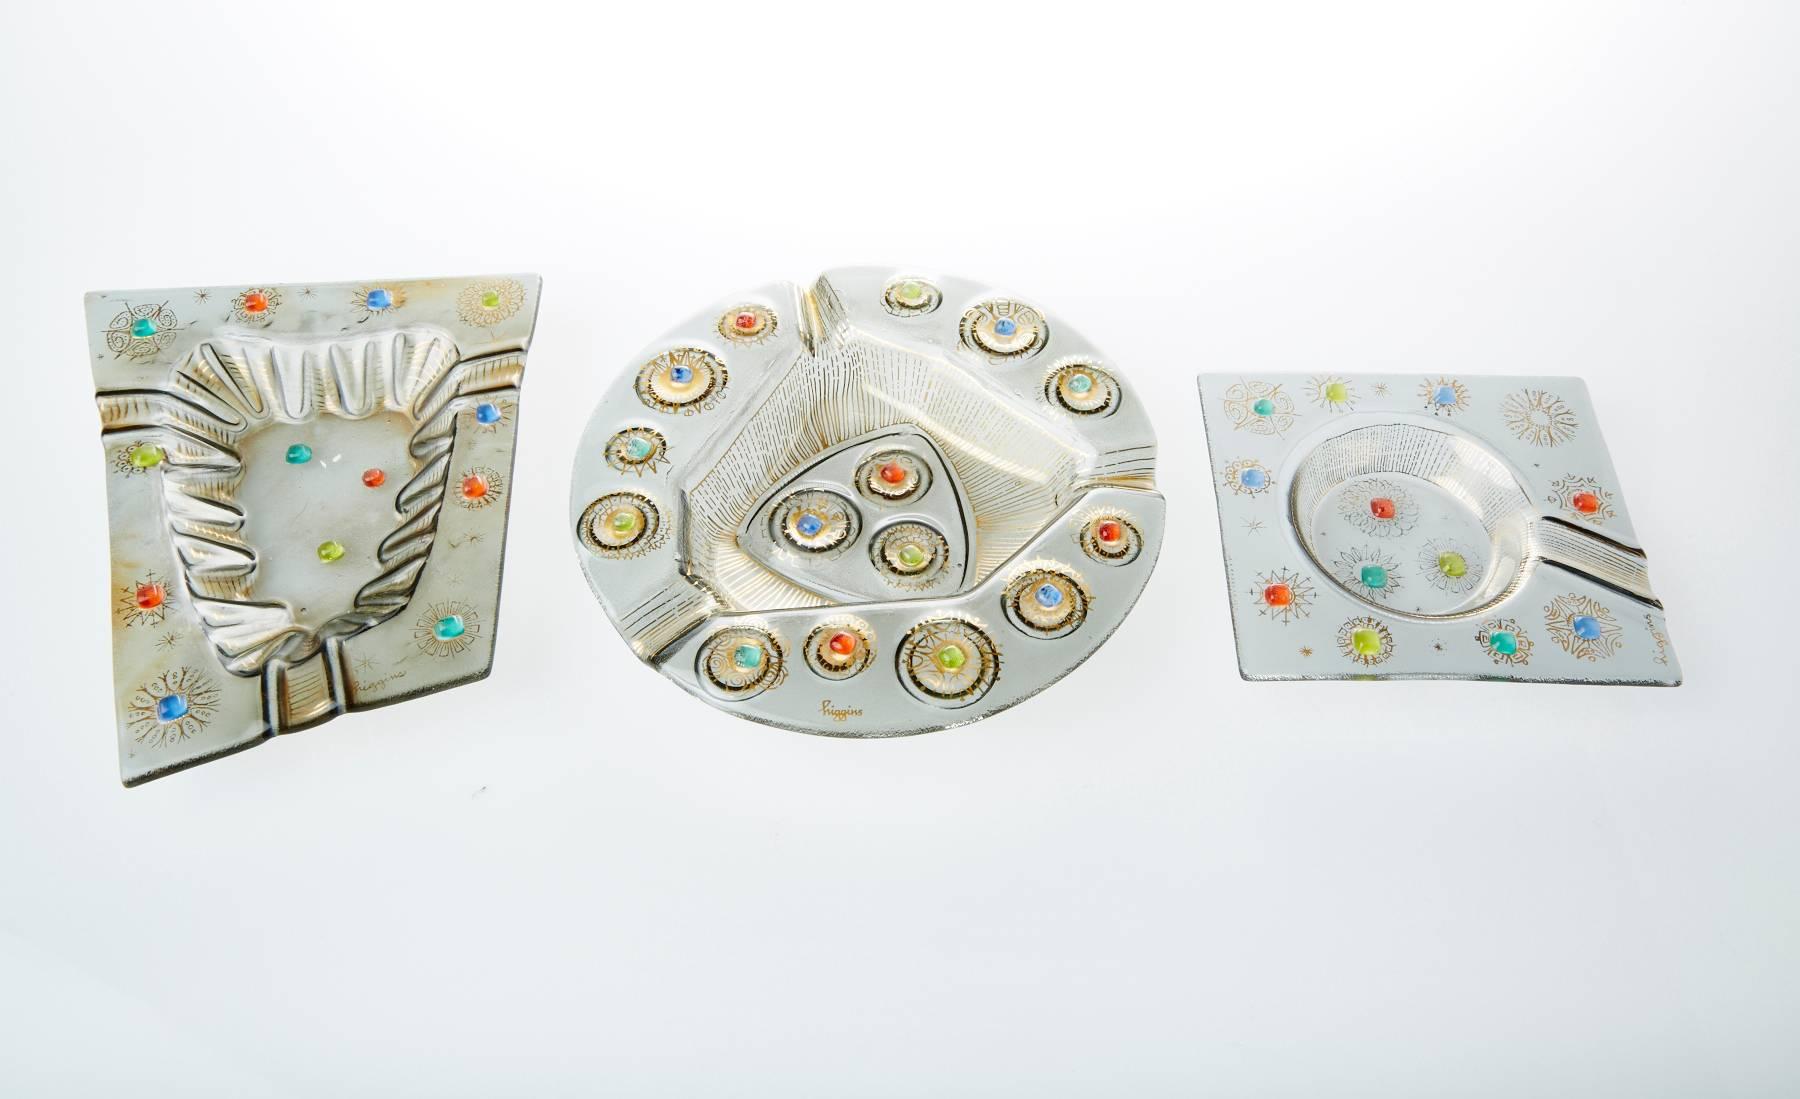 Glass artists Michael and Frances Higgins were considered to be Pioneers of the fused glass process. The Chicagan duo first developed their craft for Higgins Studio in 1948 and is still in production today. These unique pieces produced by the